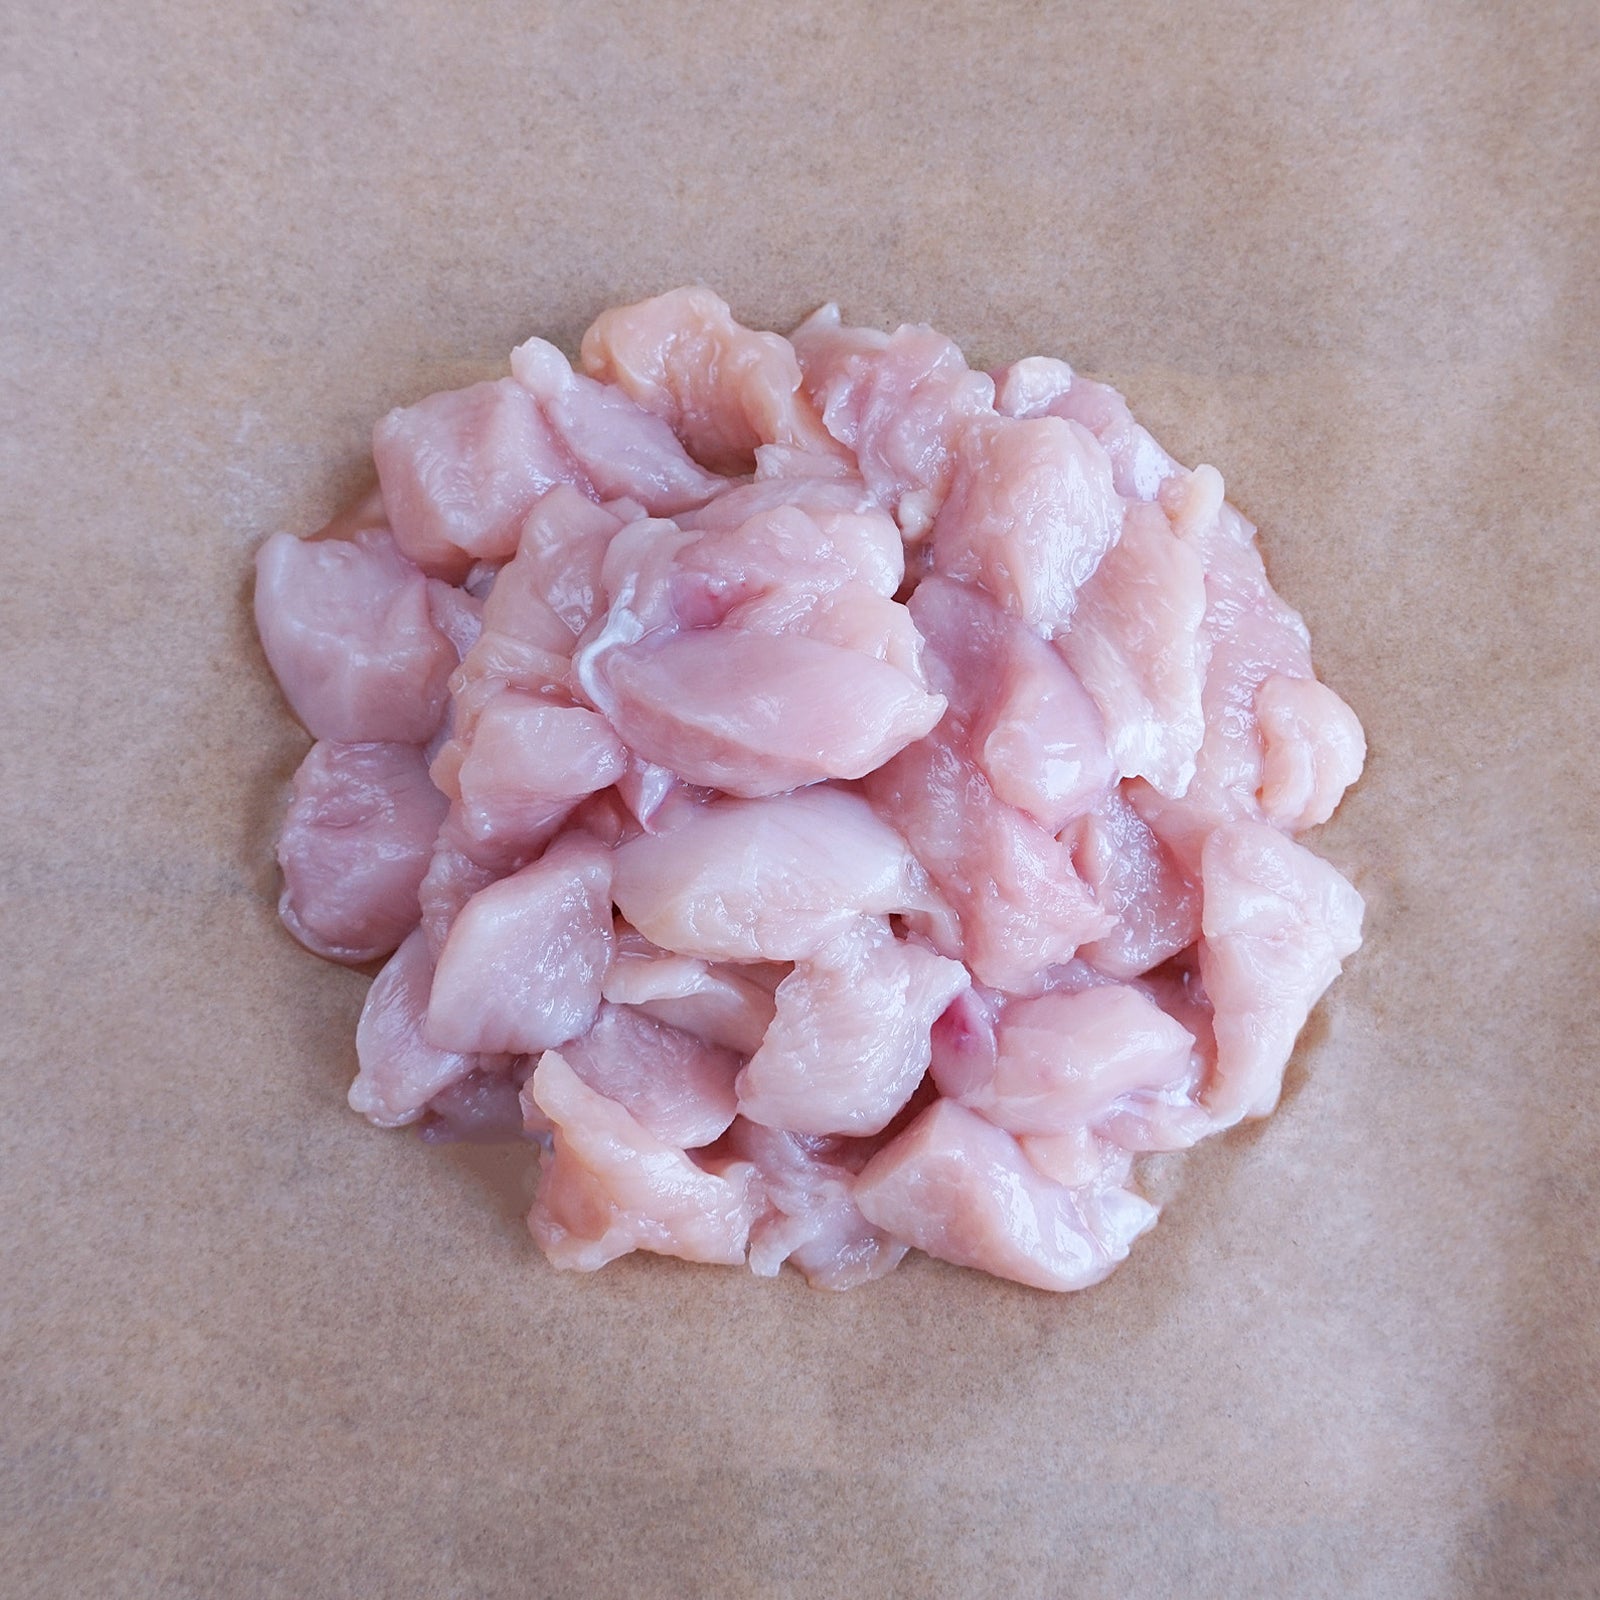 Certified Organic Free-Range Chicken Breast Cubes from New Zealand (500g) - Horizon Farms